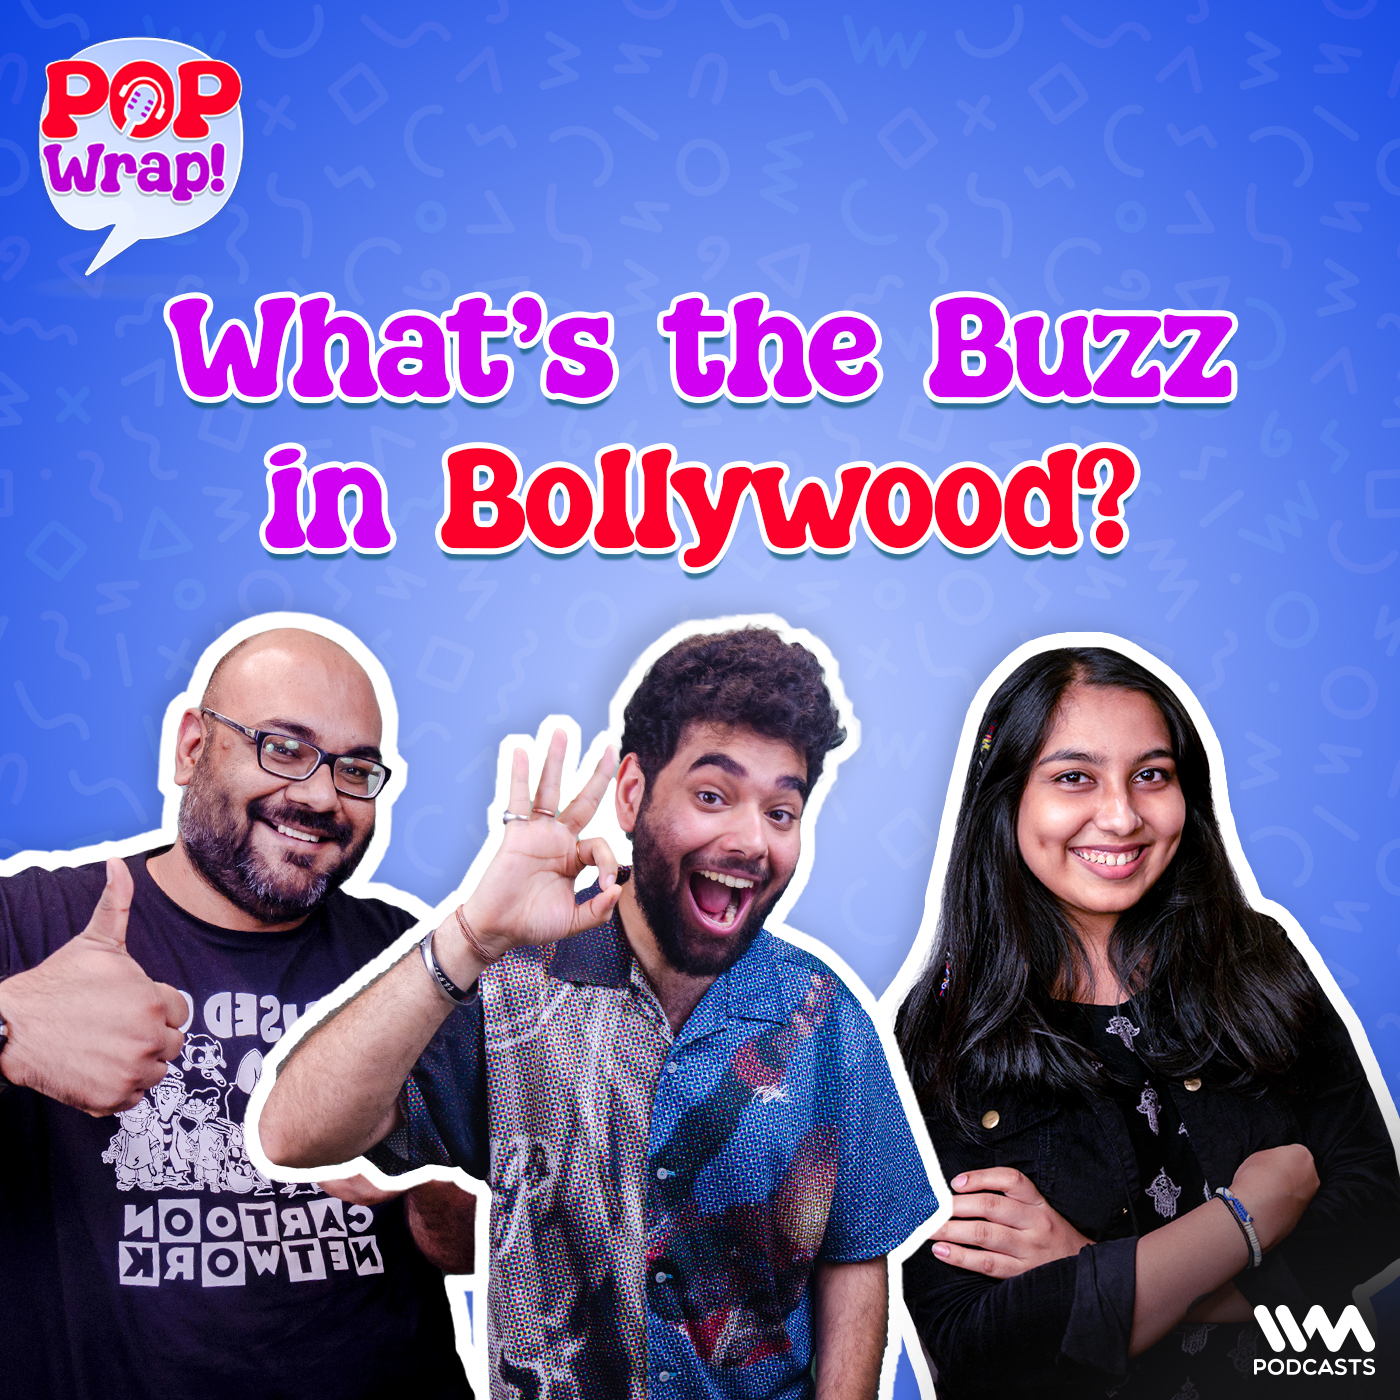 What's the Buzz in Bollywood? | Pop Wrap!